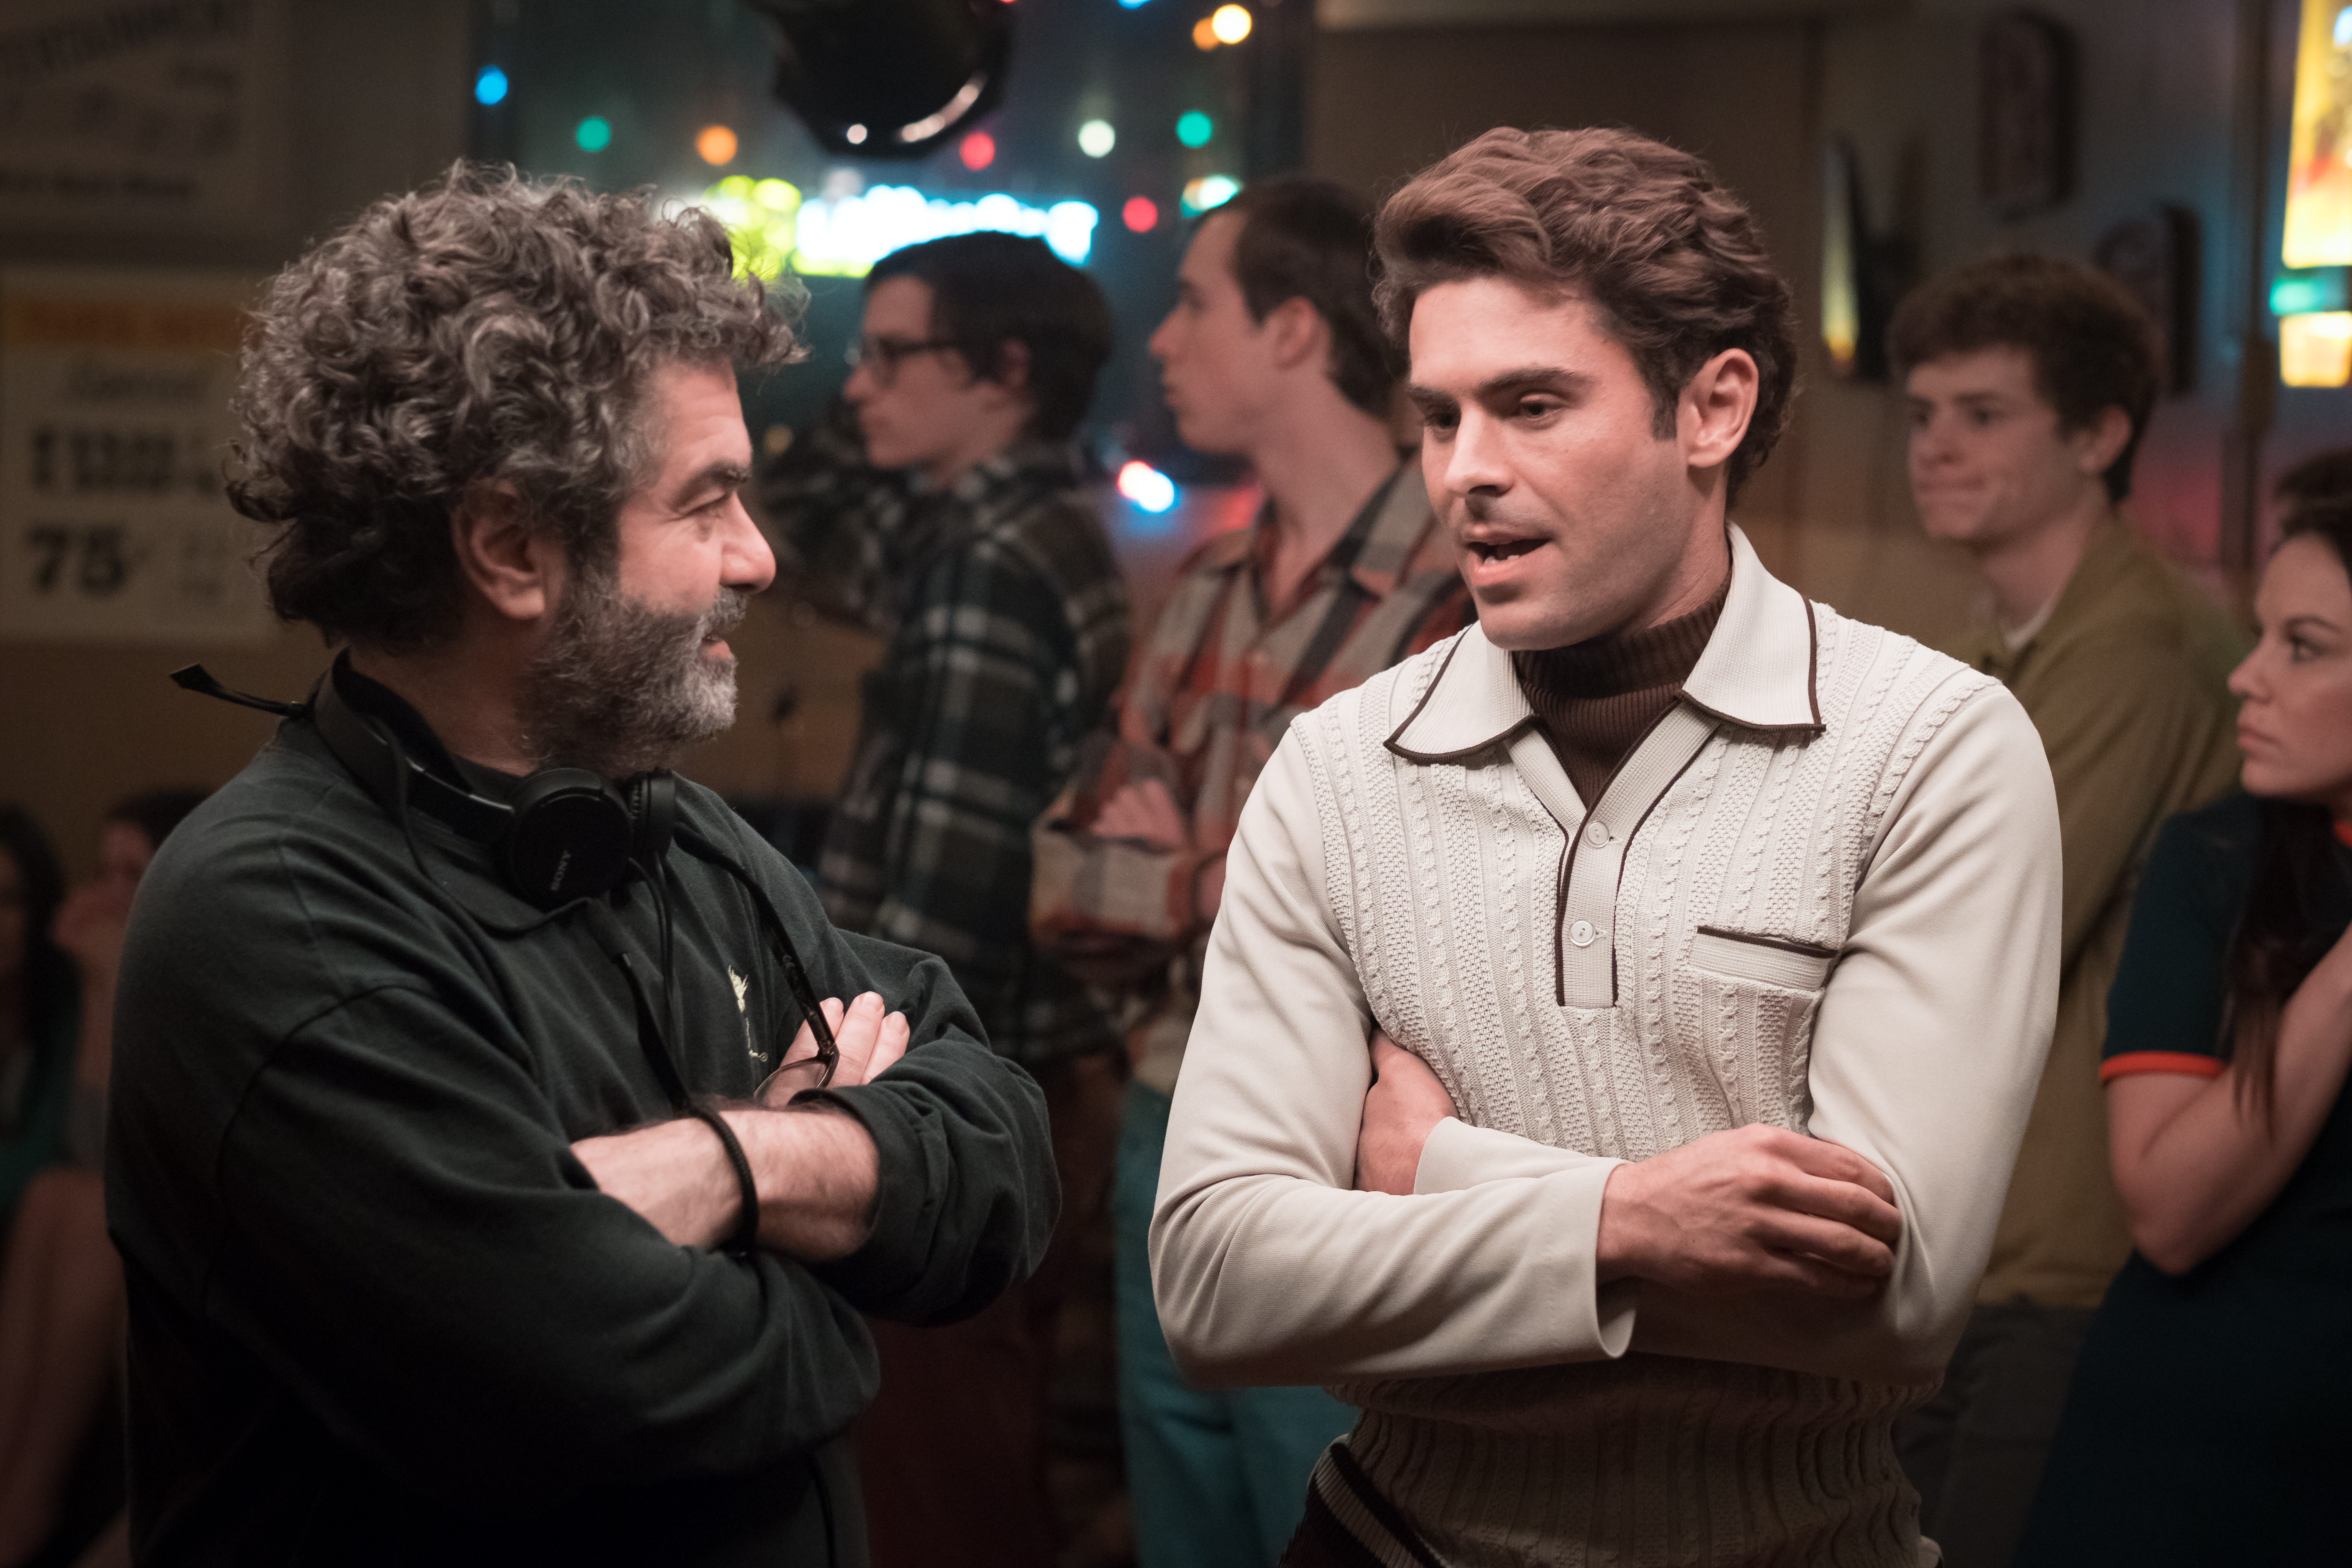 'Extremely Wicked, Shockingly Evil and Vile' director Joe Berlinger and star Zac Efron